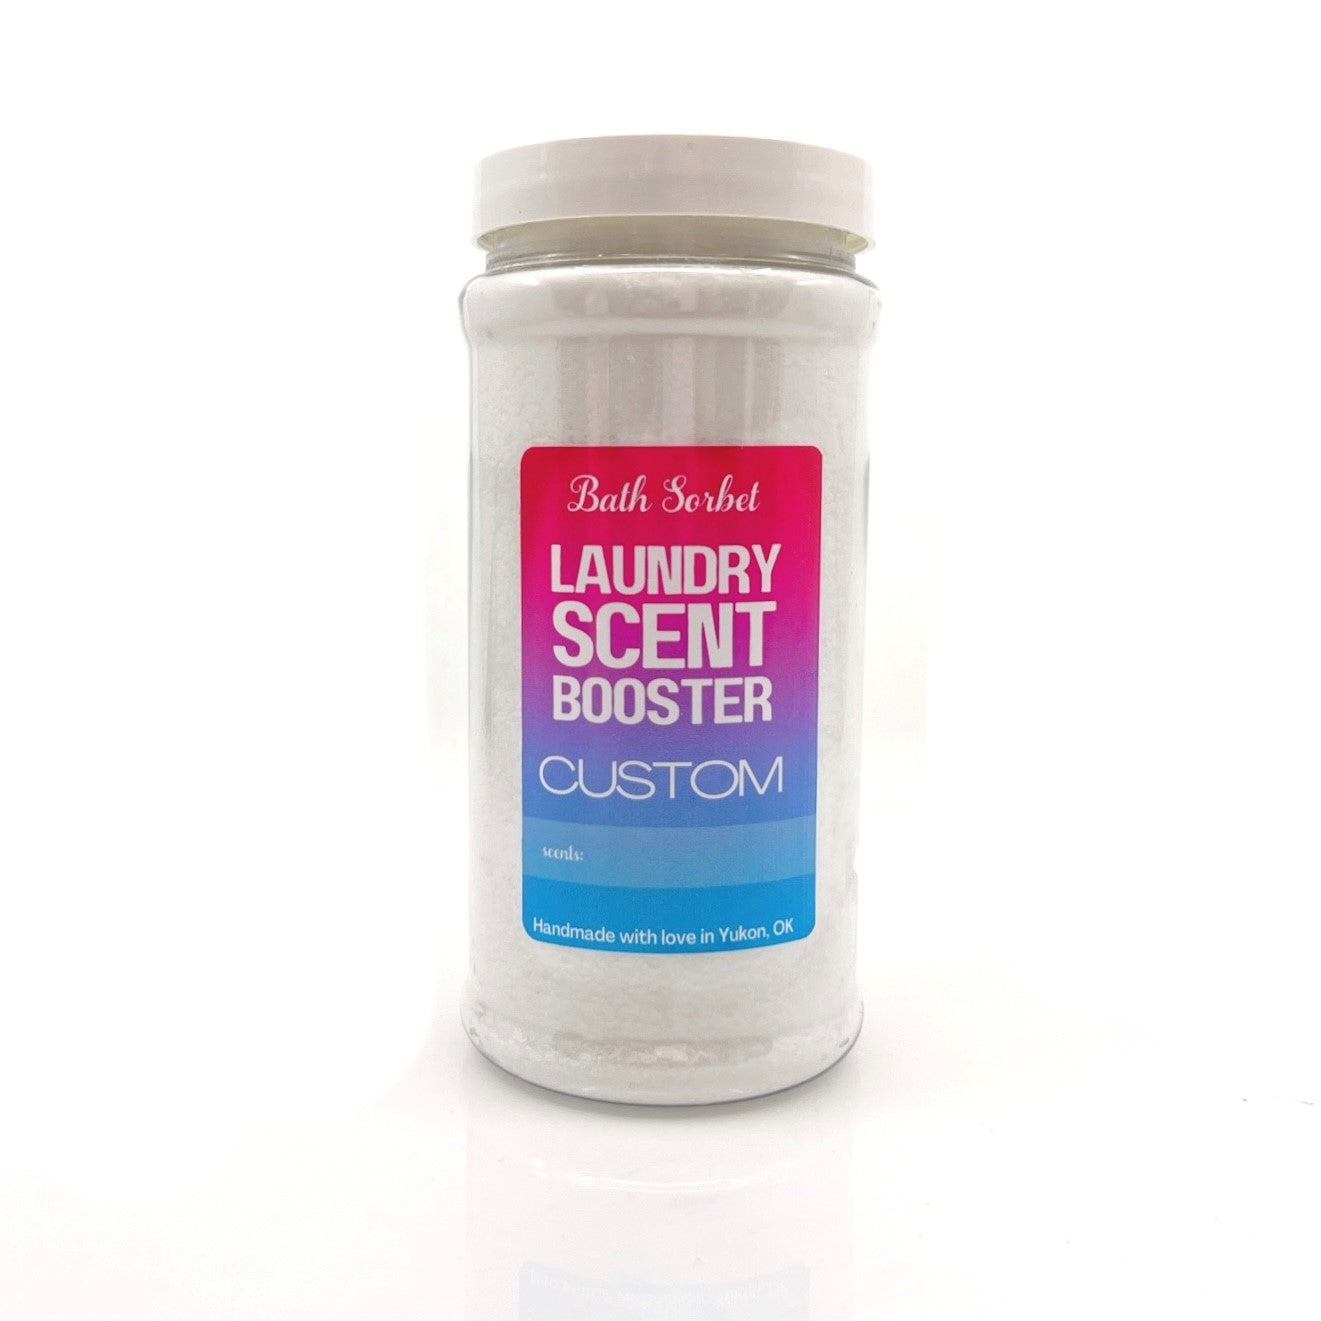 Custom Laundry Scent Booster